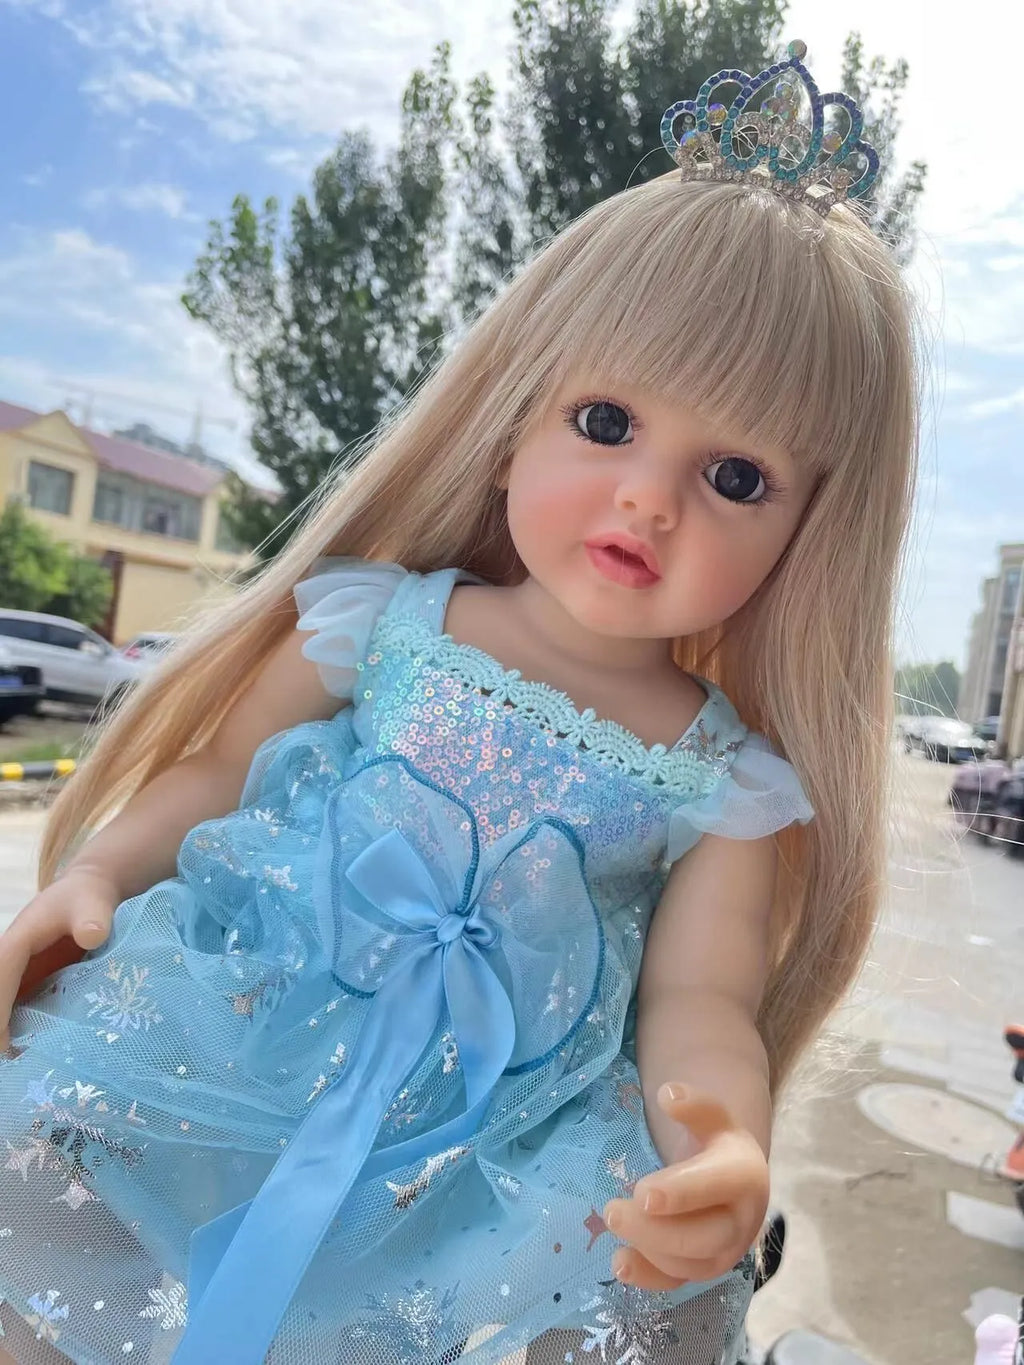 All Silicone Babydoll| Dolls For 3 Year Olds | Toddler Girl Doll 22''